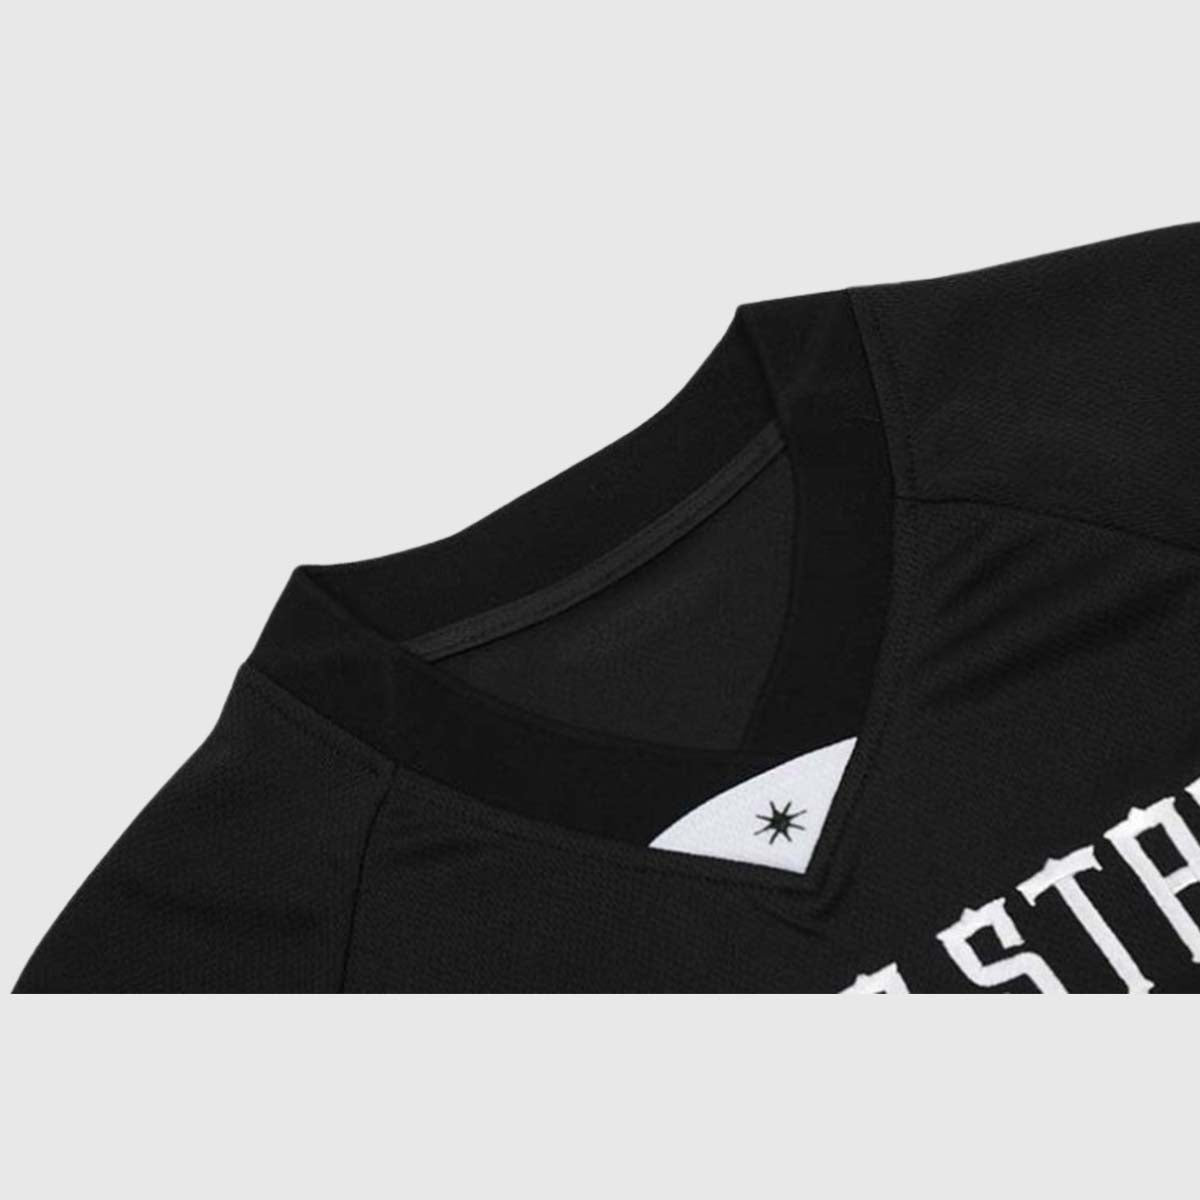 Detail view -1  of the unisex's number V-neck jersey in black